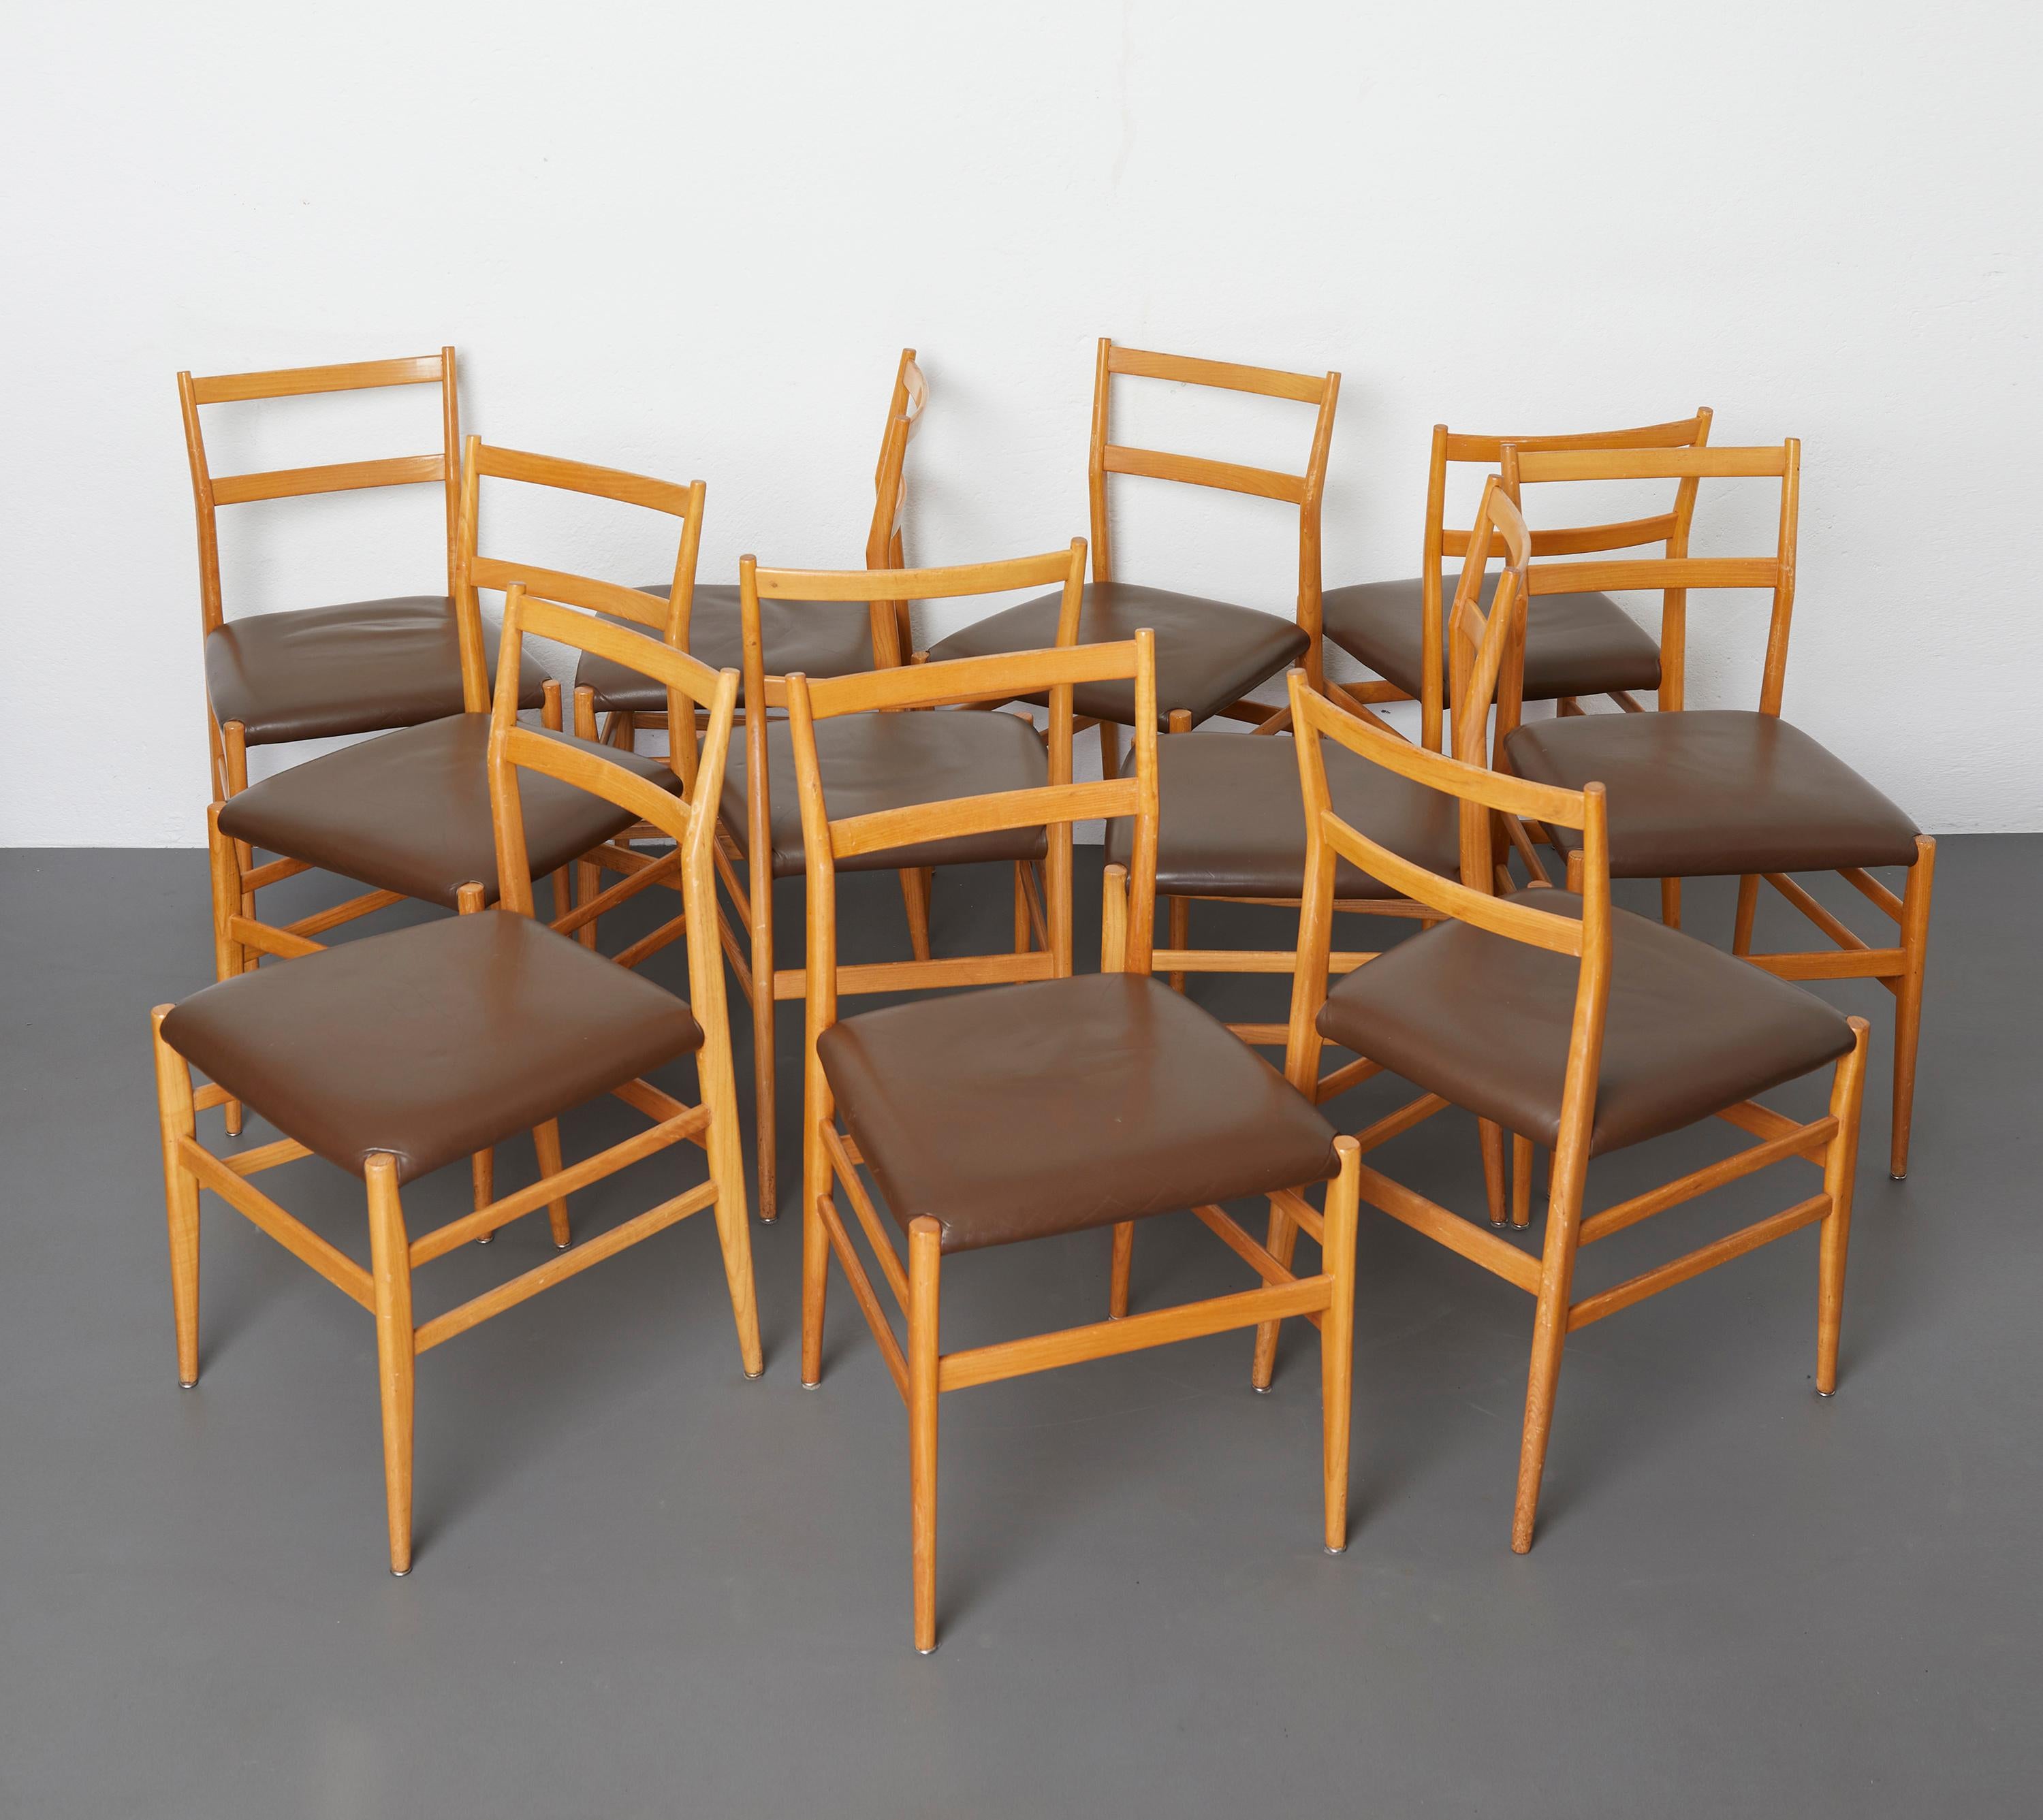 Set of 12 Leggera dining chairs in ash wood and leather by Gio Ponti for Cassina

These iconic chairs are the model 646 